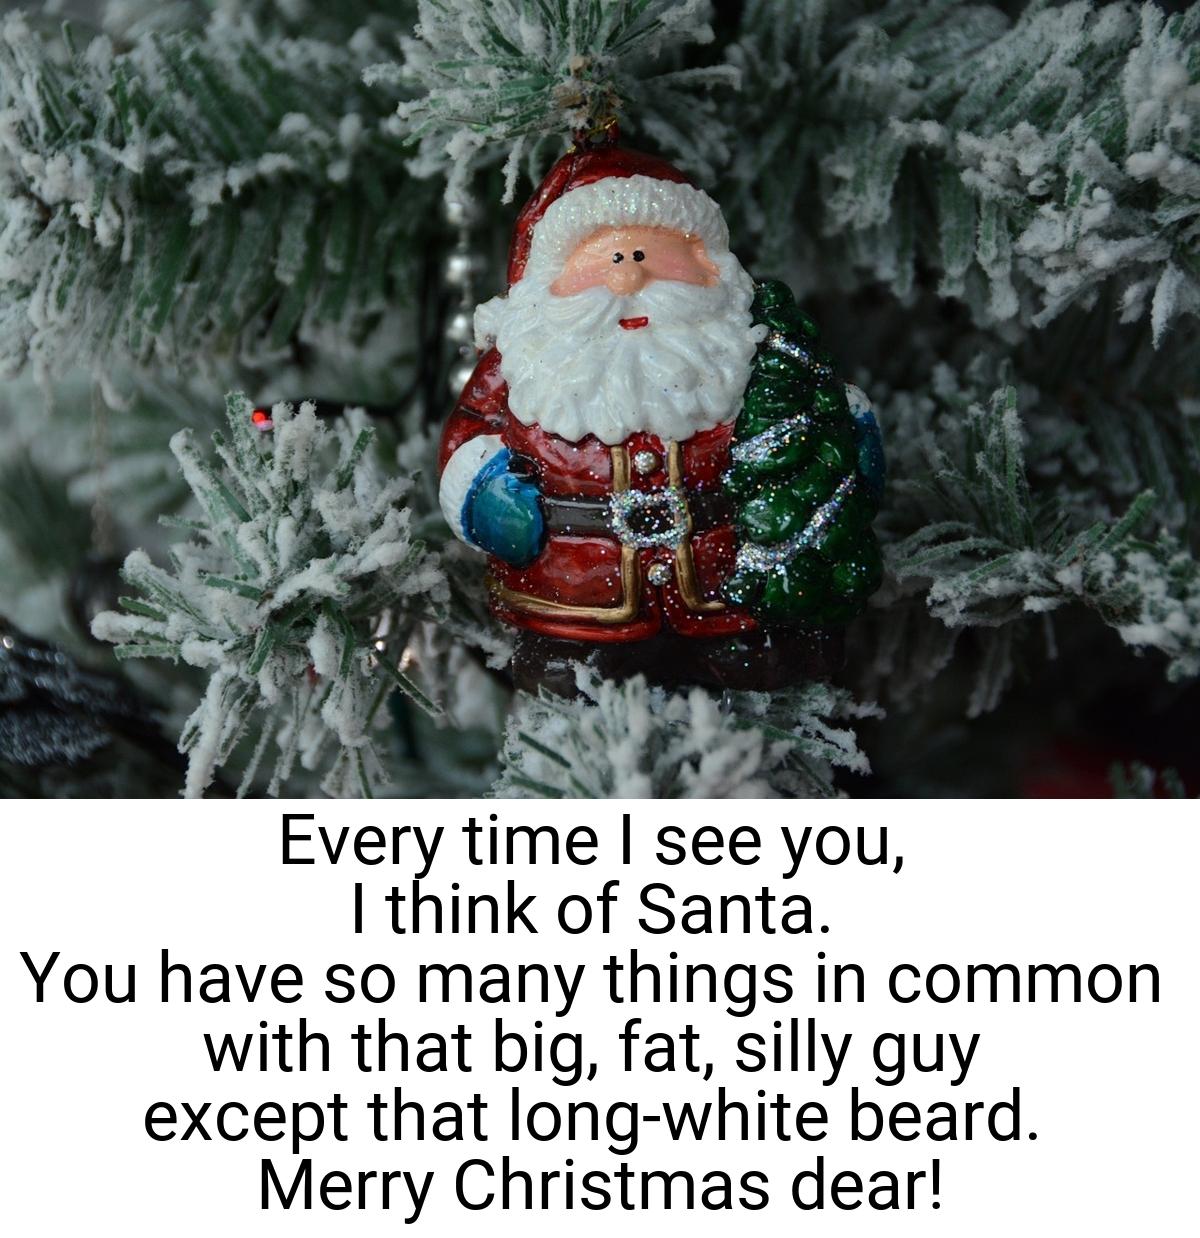 Every time I see you, I think of Santa. You have so many